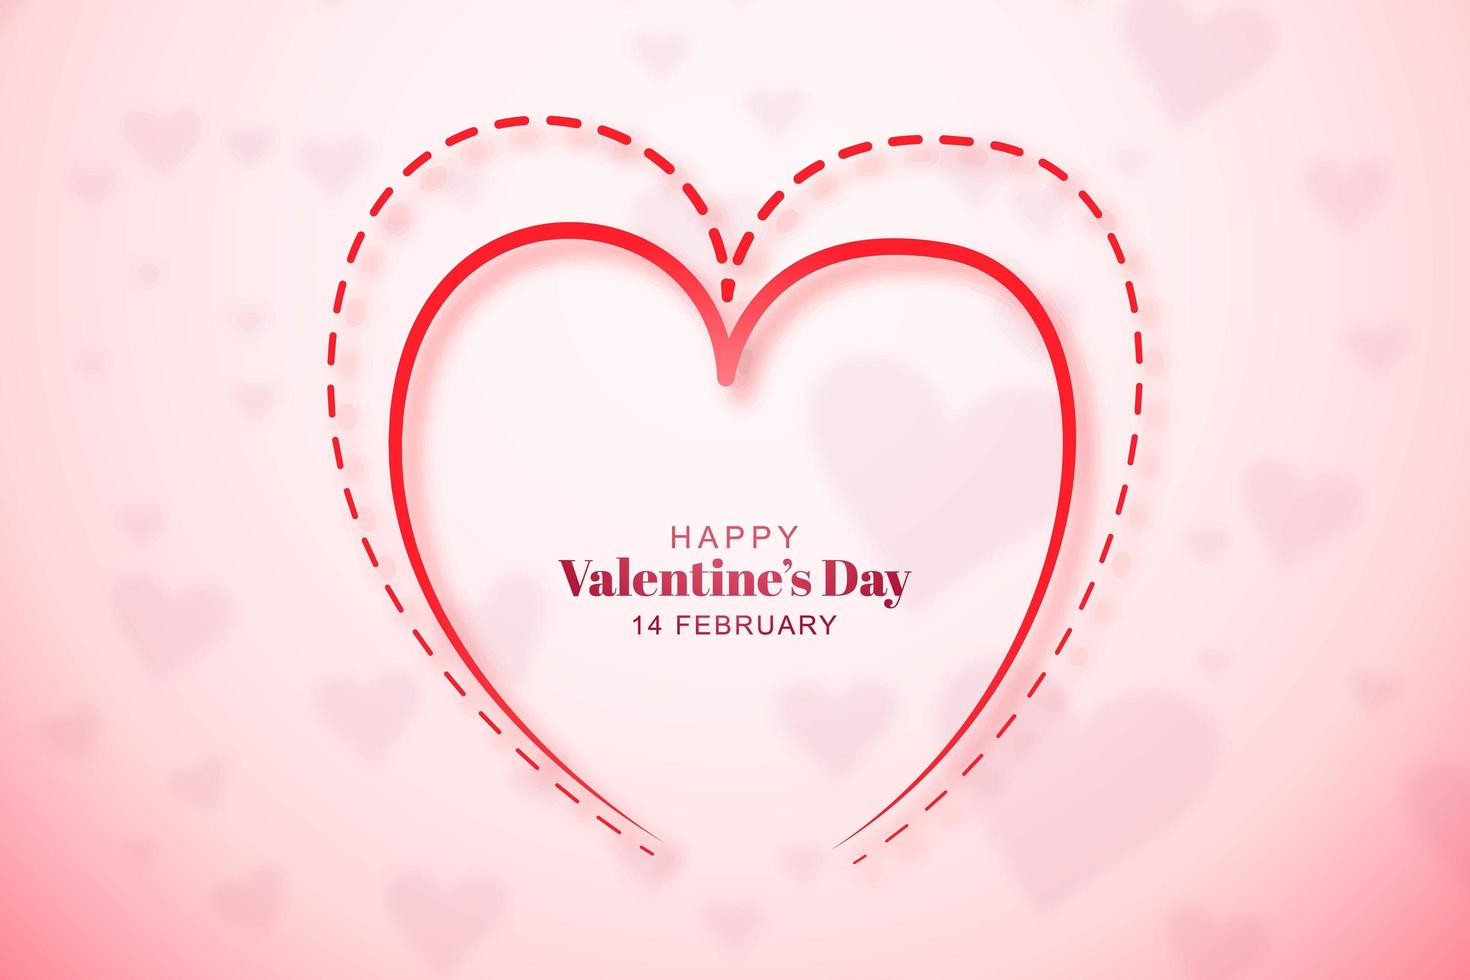 Valentines day card with dashed and outline heart vector